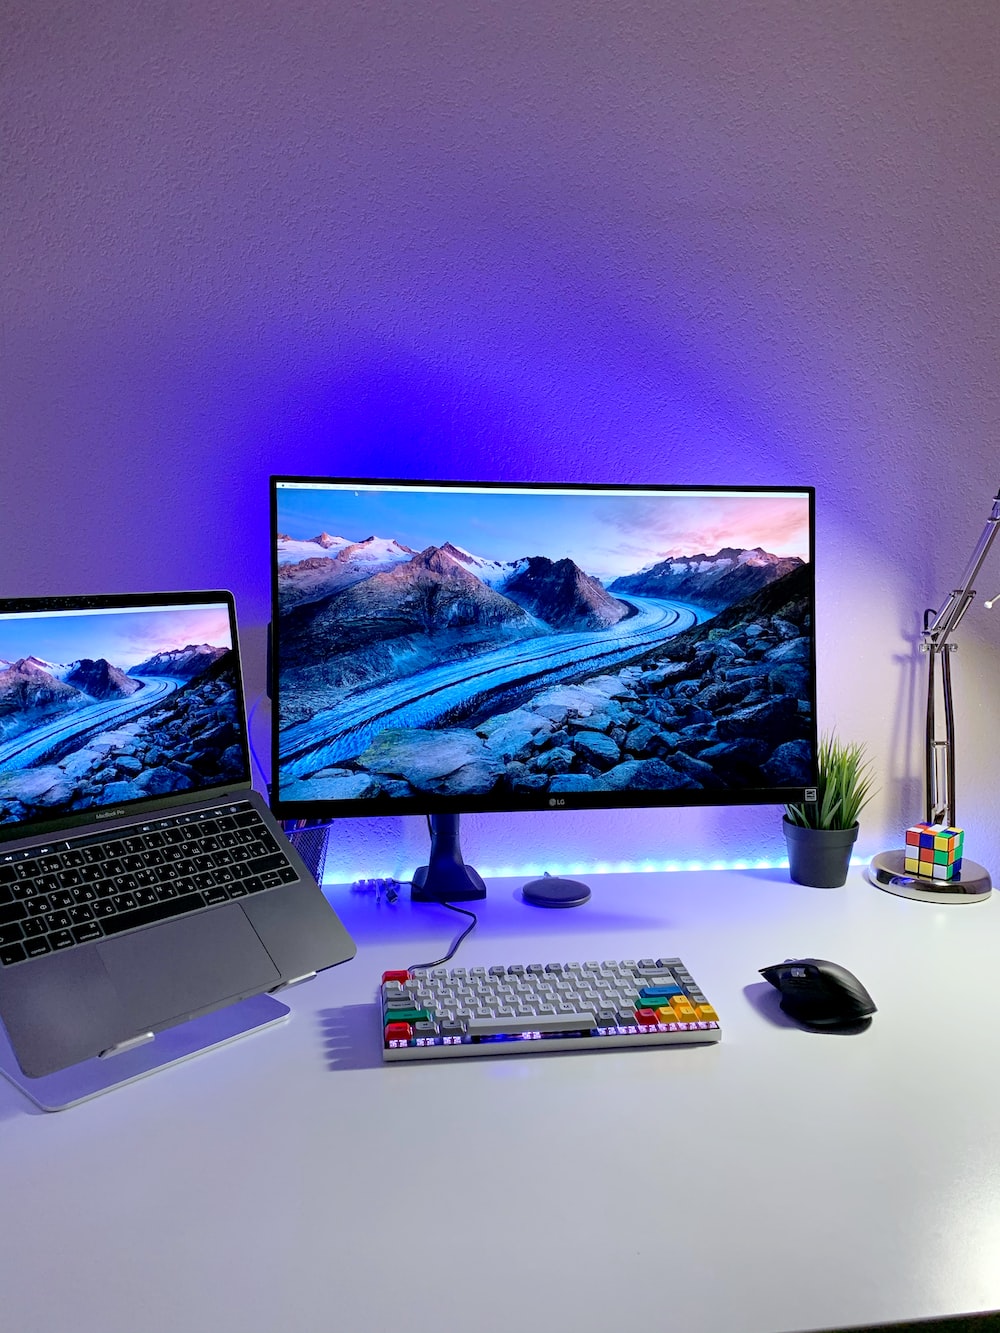 Should you have a light behind your monitor?